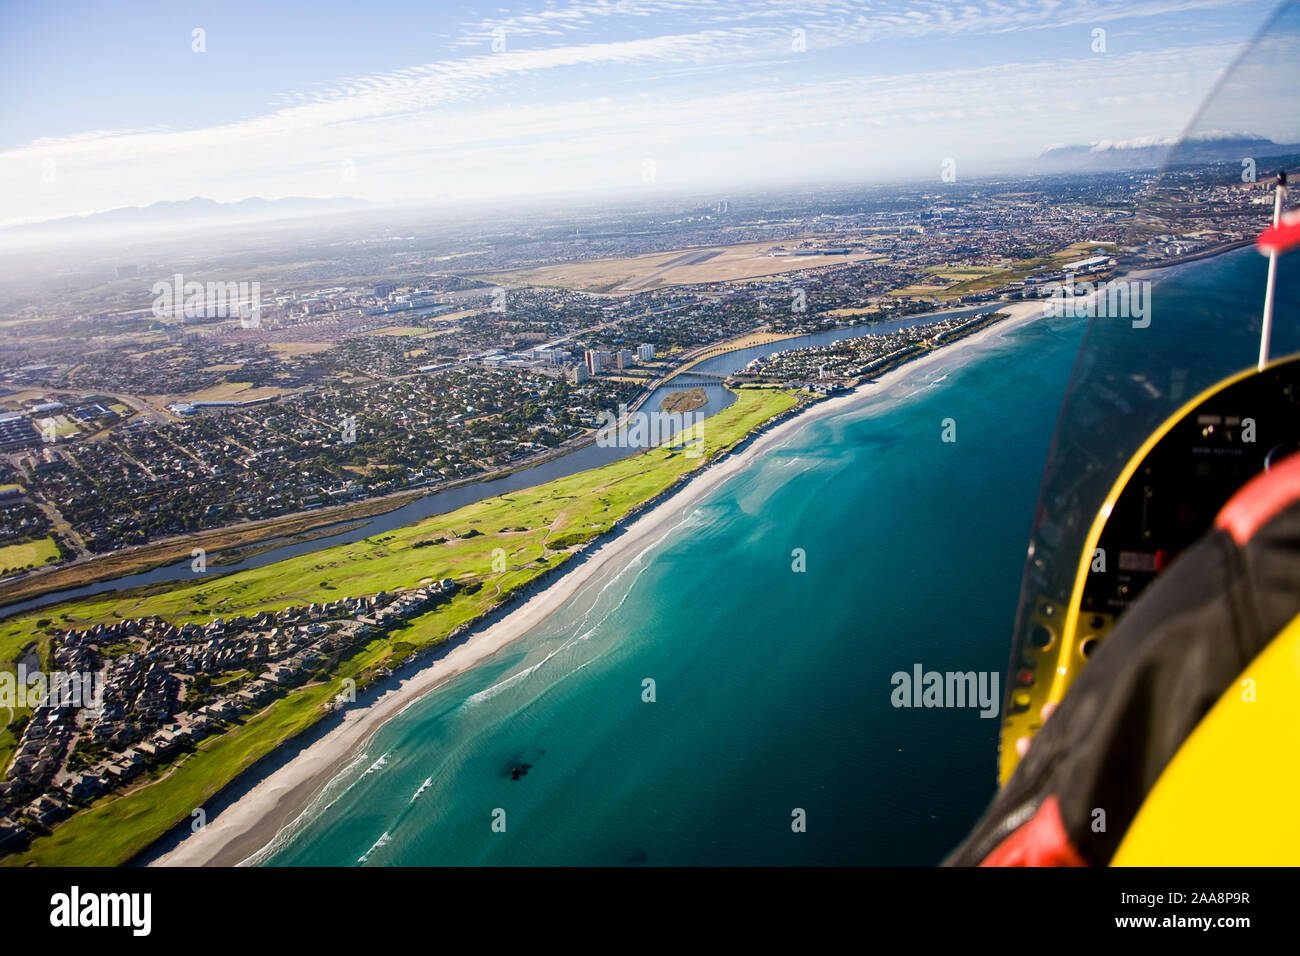 Aerial view of Milnerton Golf Course, Estate, Beach and Lagoon from aircrat, Cape Town, South Africa Stock Photo